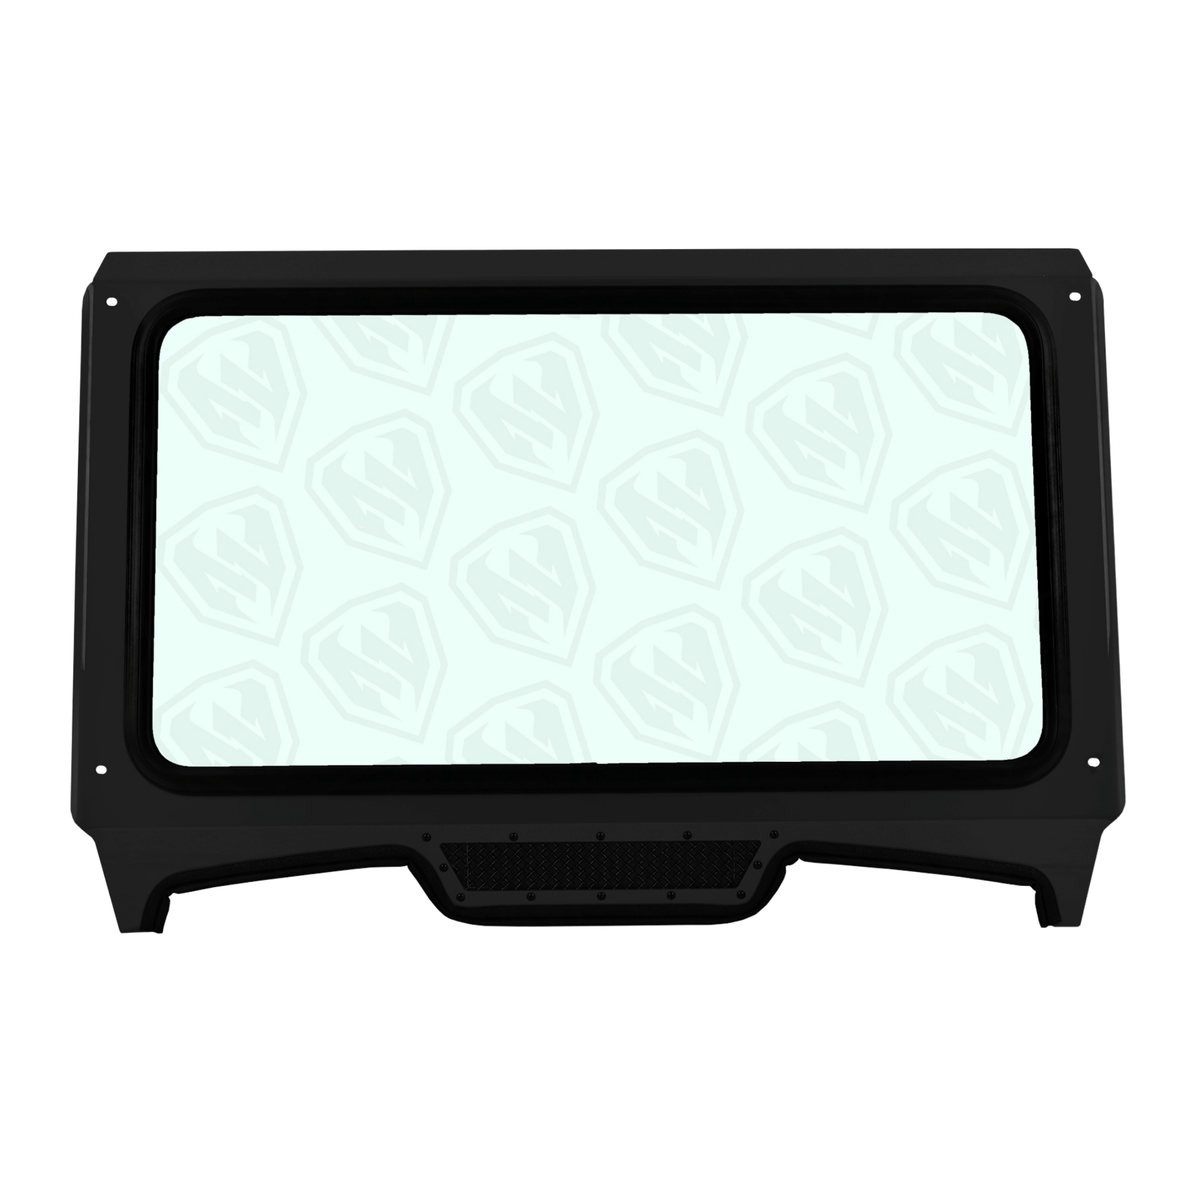 Polaris RZR Turbo S & XP 1000 Glass Windshield for CageWrx Super Shorty Cage (2019+)